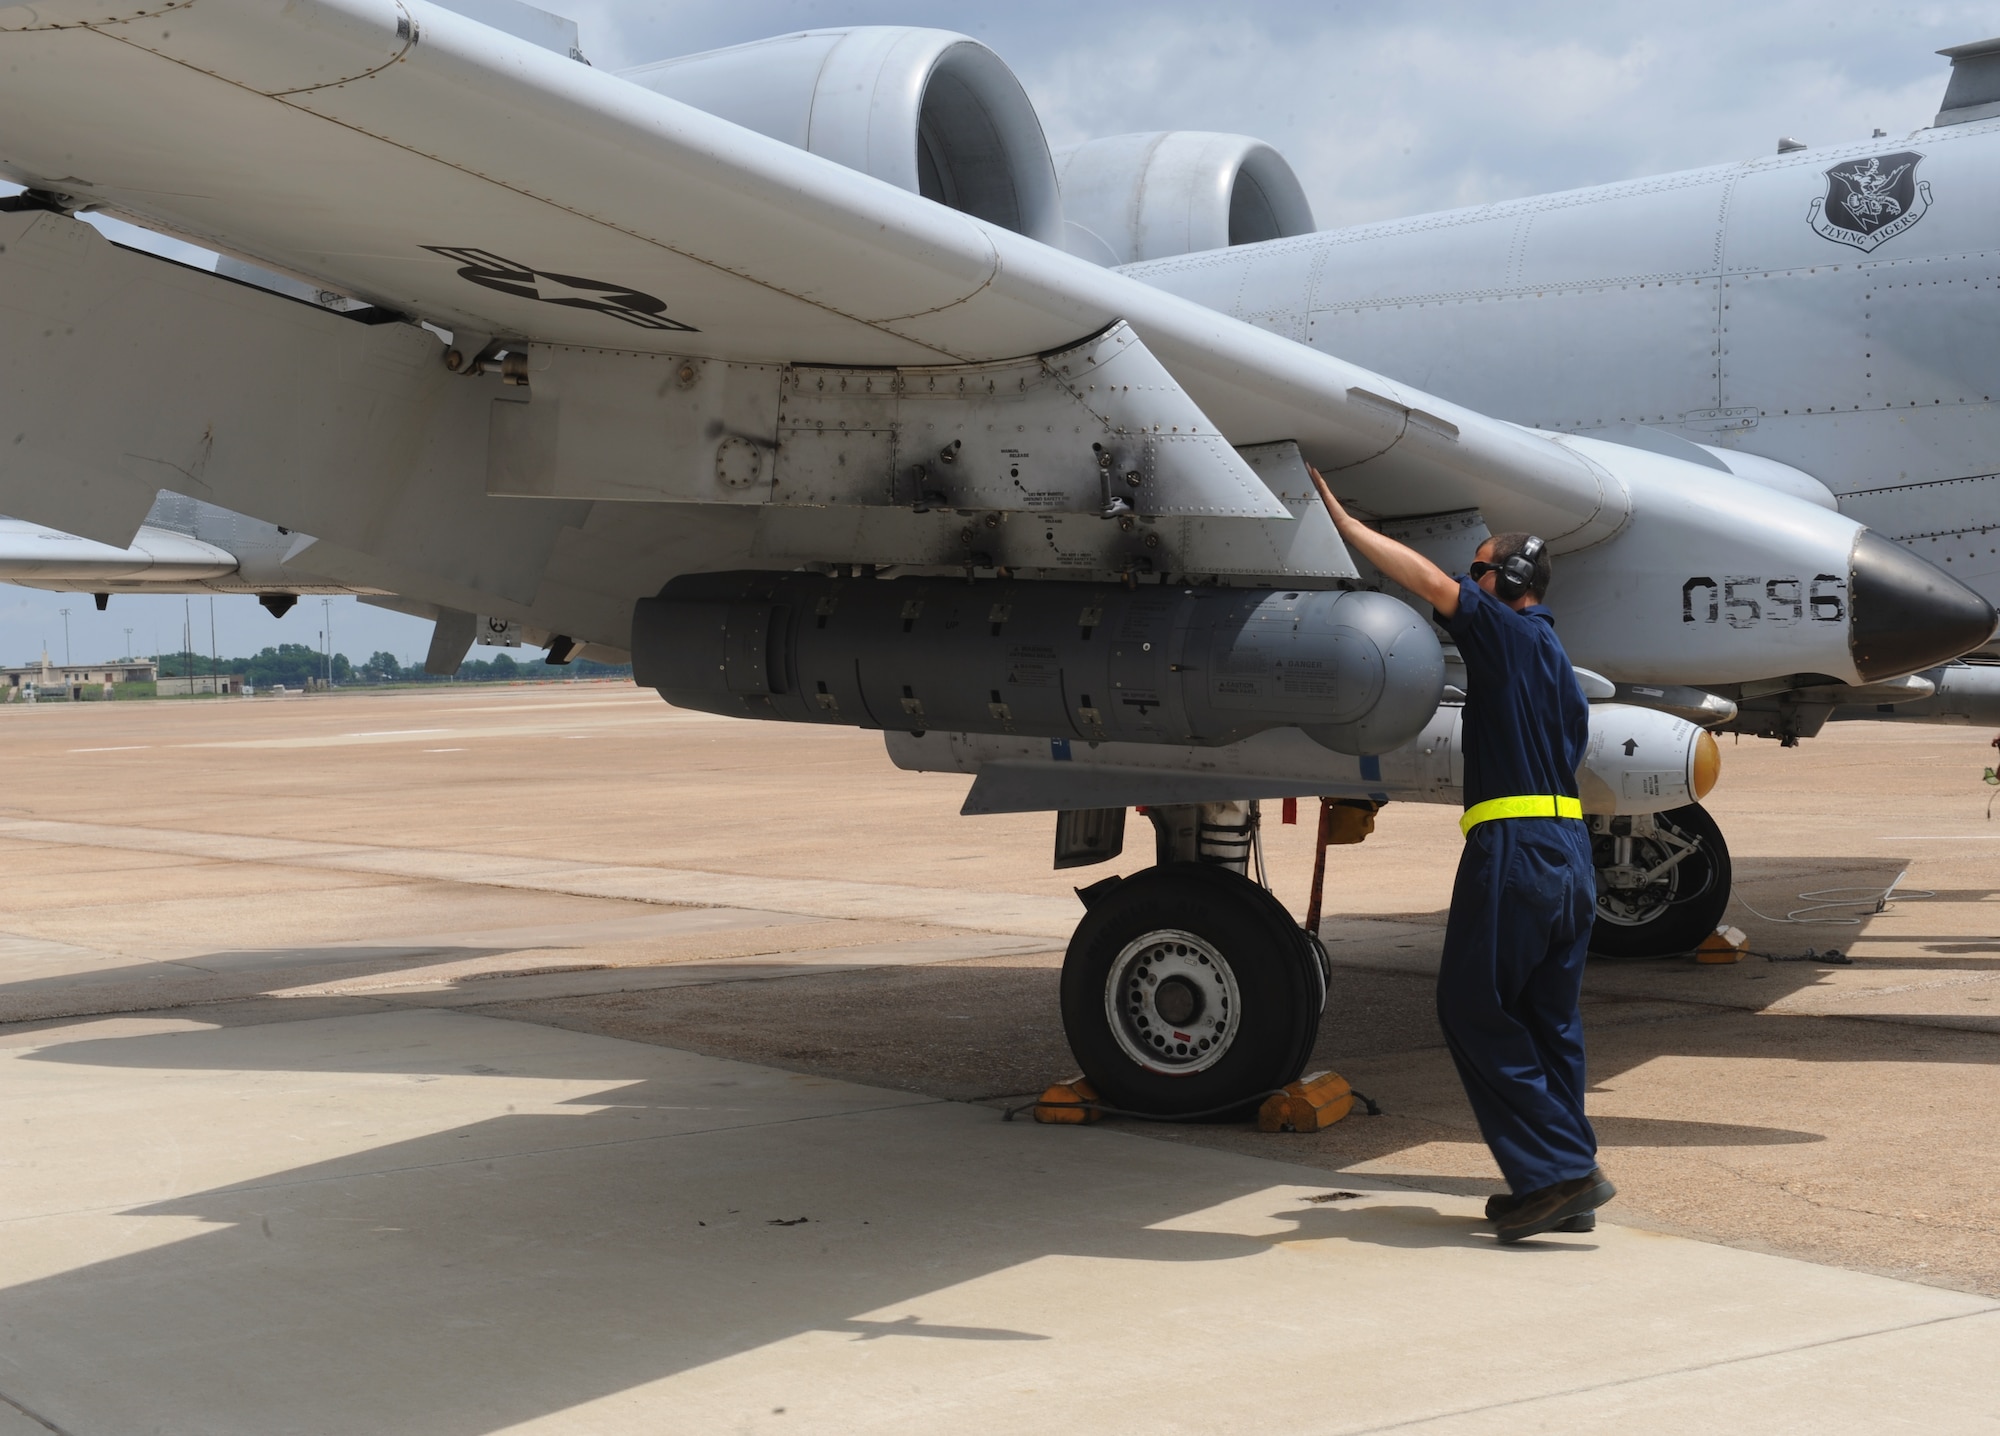 A crew chief from Moody Air Force Base, Ga., checks the wing of an A-10 Thunderbolt II fighter for discrepancies on Barksdale Air Force Base, La., June 4, 2013. During flight, nuts and bolts come loose because of vibrations from the plane. Crew chiefs must ensure all nuts and bolts are tightened or replaced after flight. (U.S. Air Force photo/Airman 1st Class Benjamin Gonsier)
